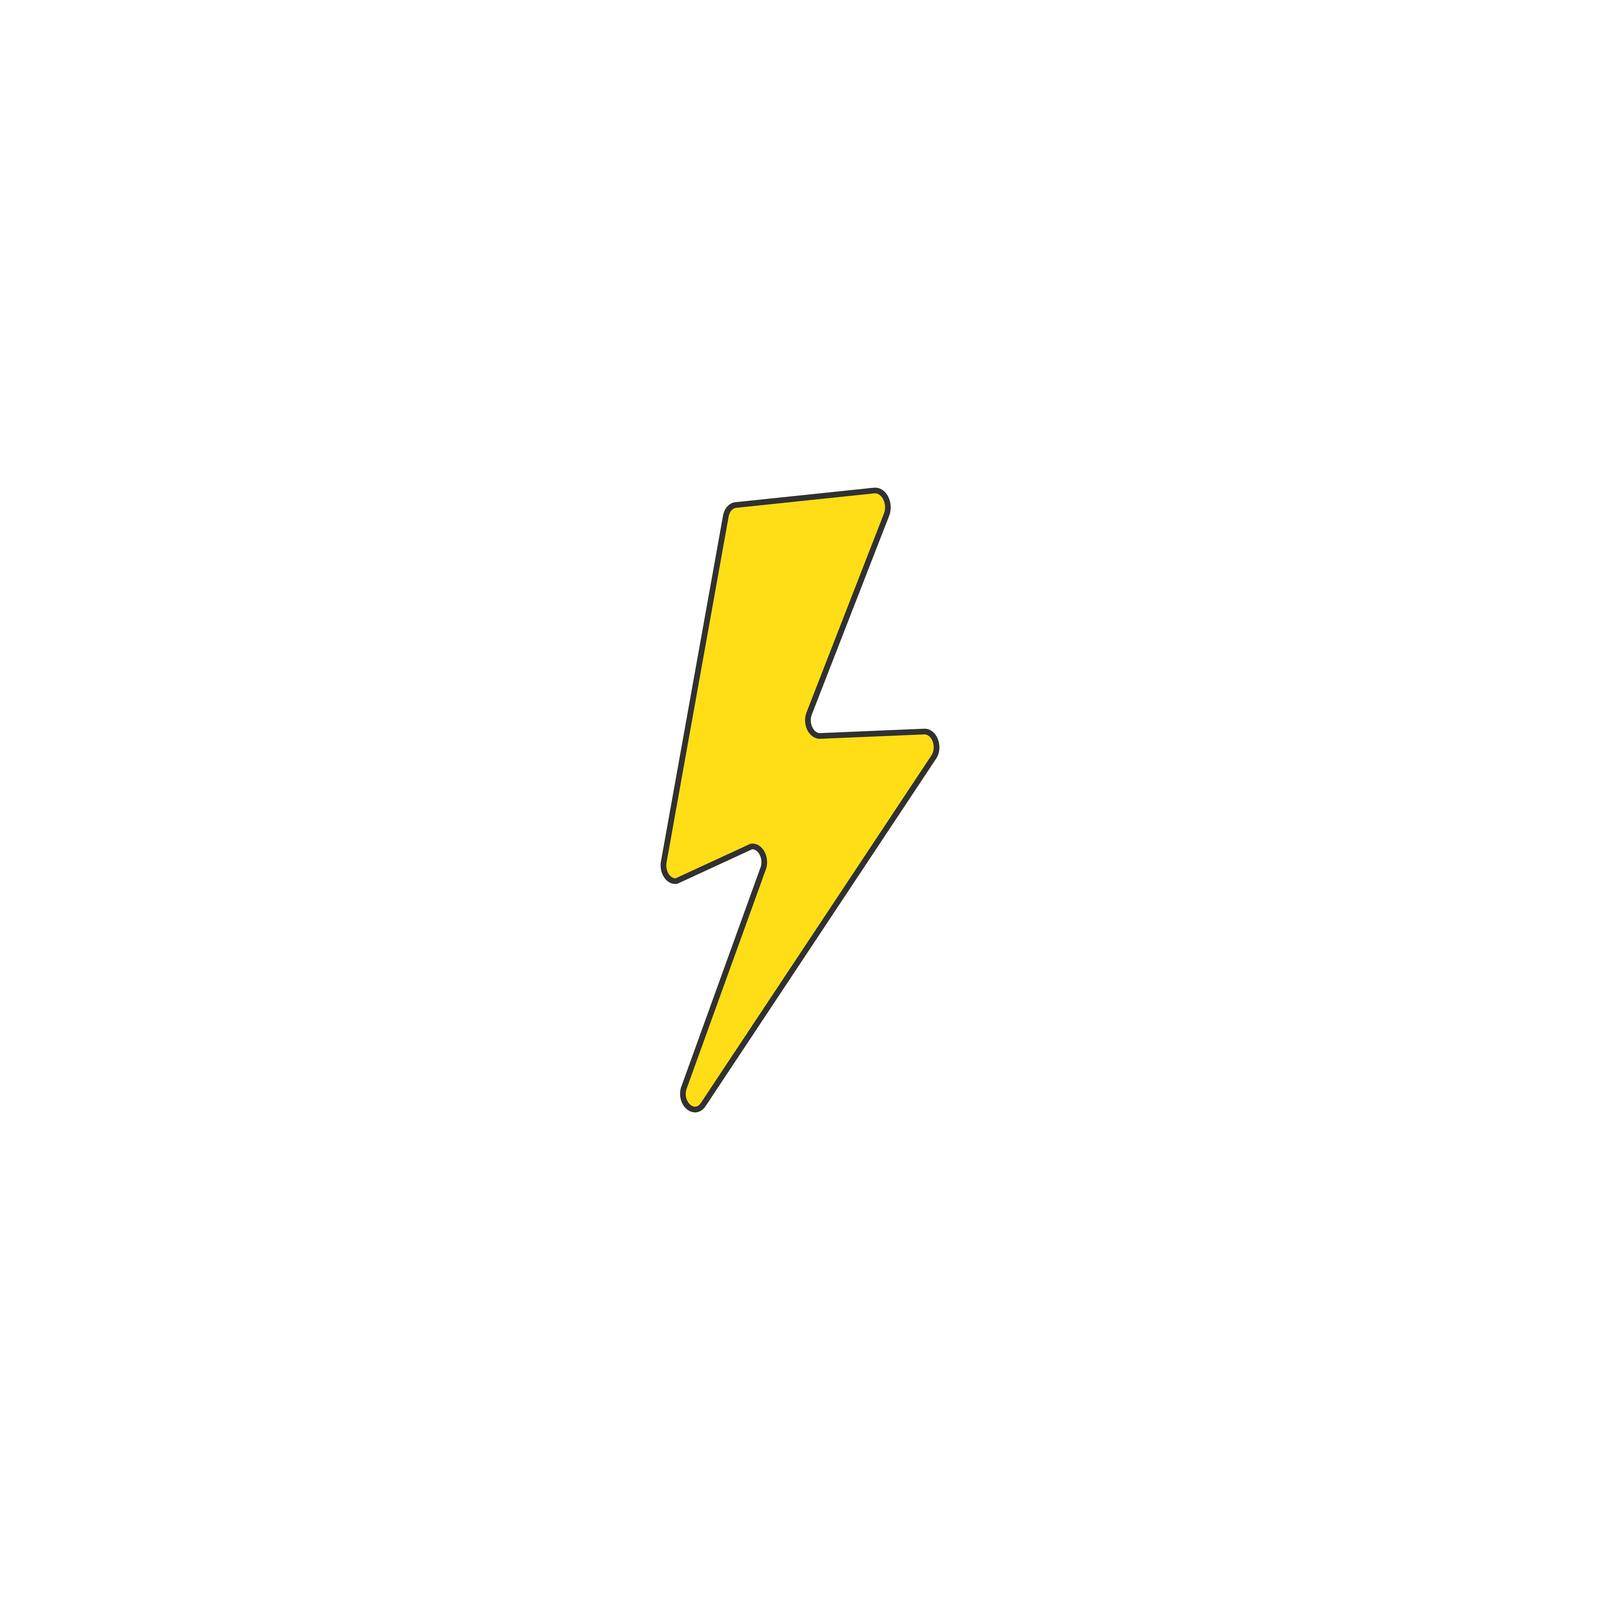 Thunder icon. Lightning vector isolated. Modern simple flat warning sign. Electr icty nternet concept. Trendy nature vector electricty symbol for website design, web button.